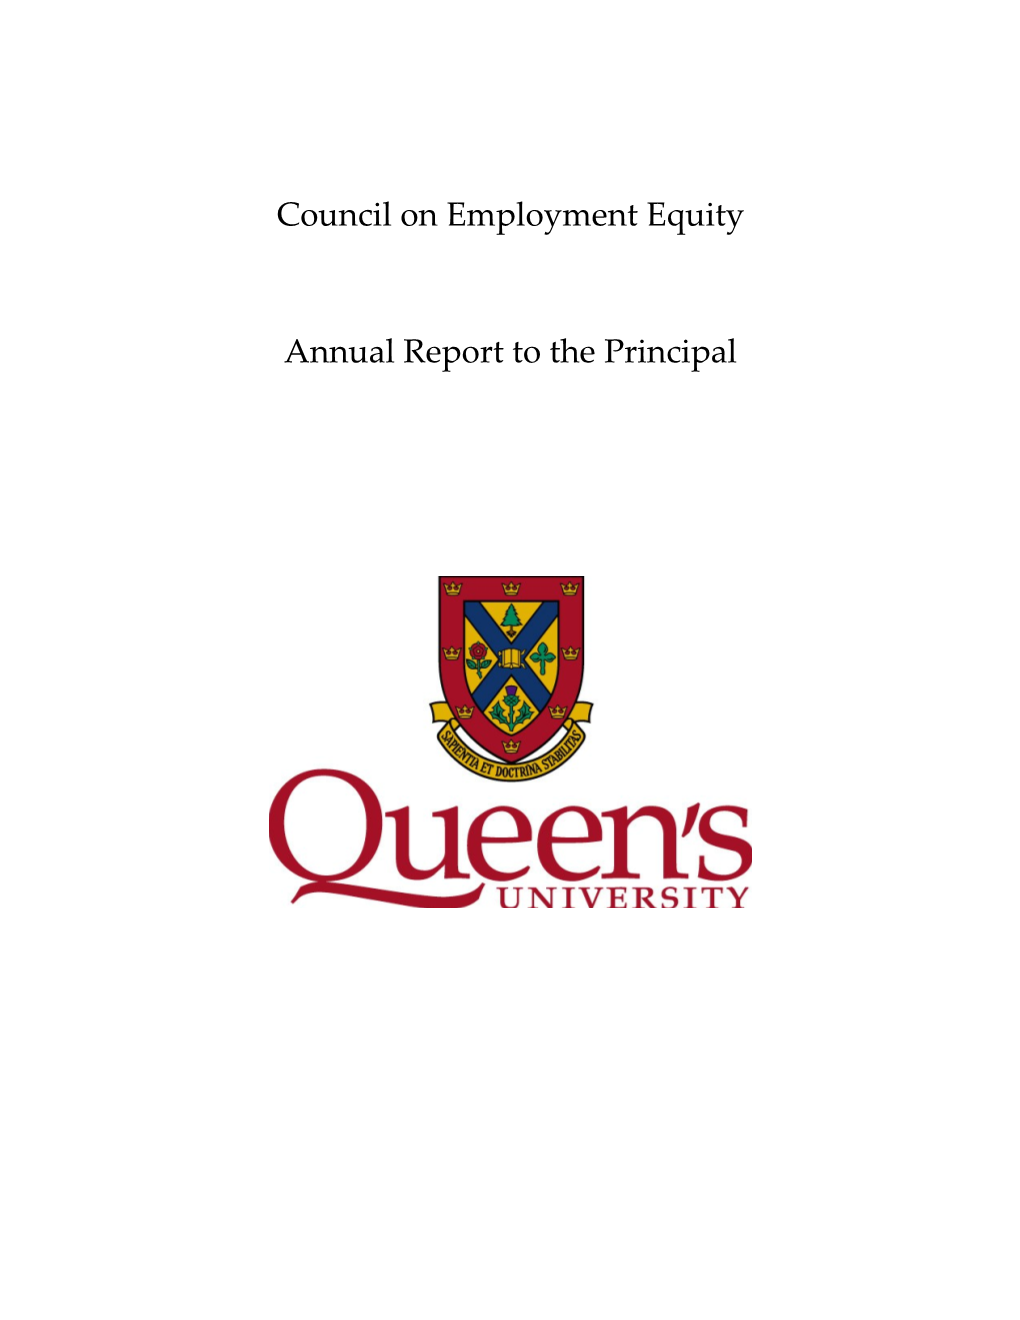 Council on Employment Equity Annual Report